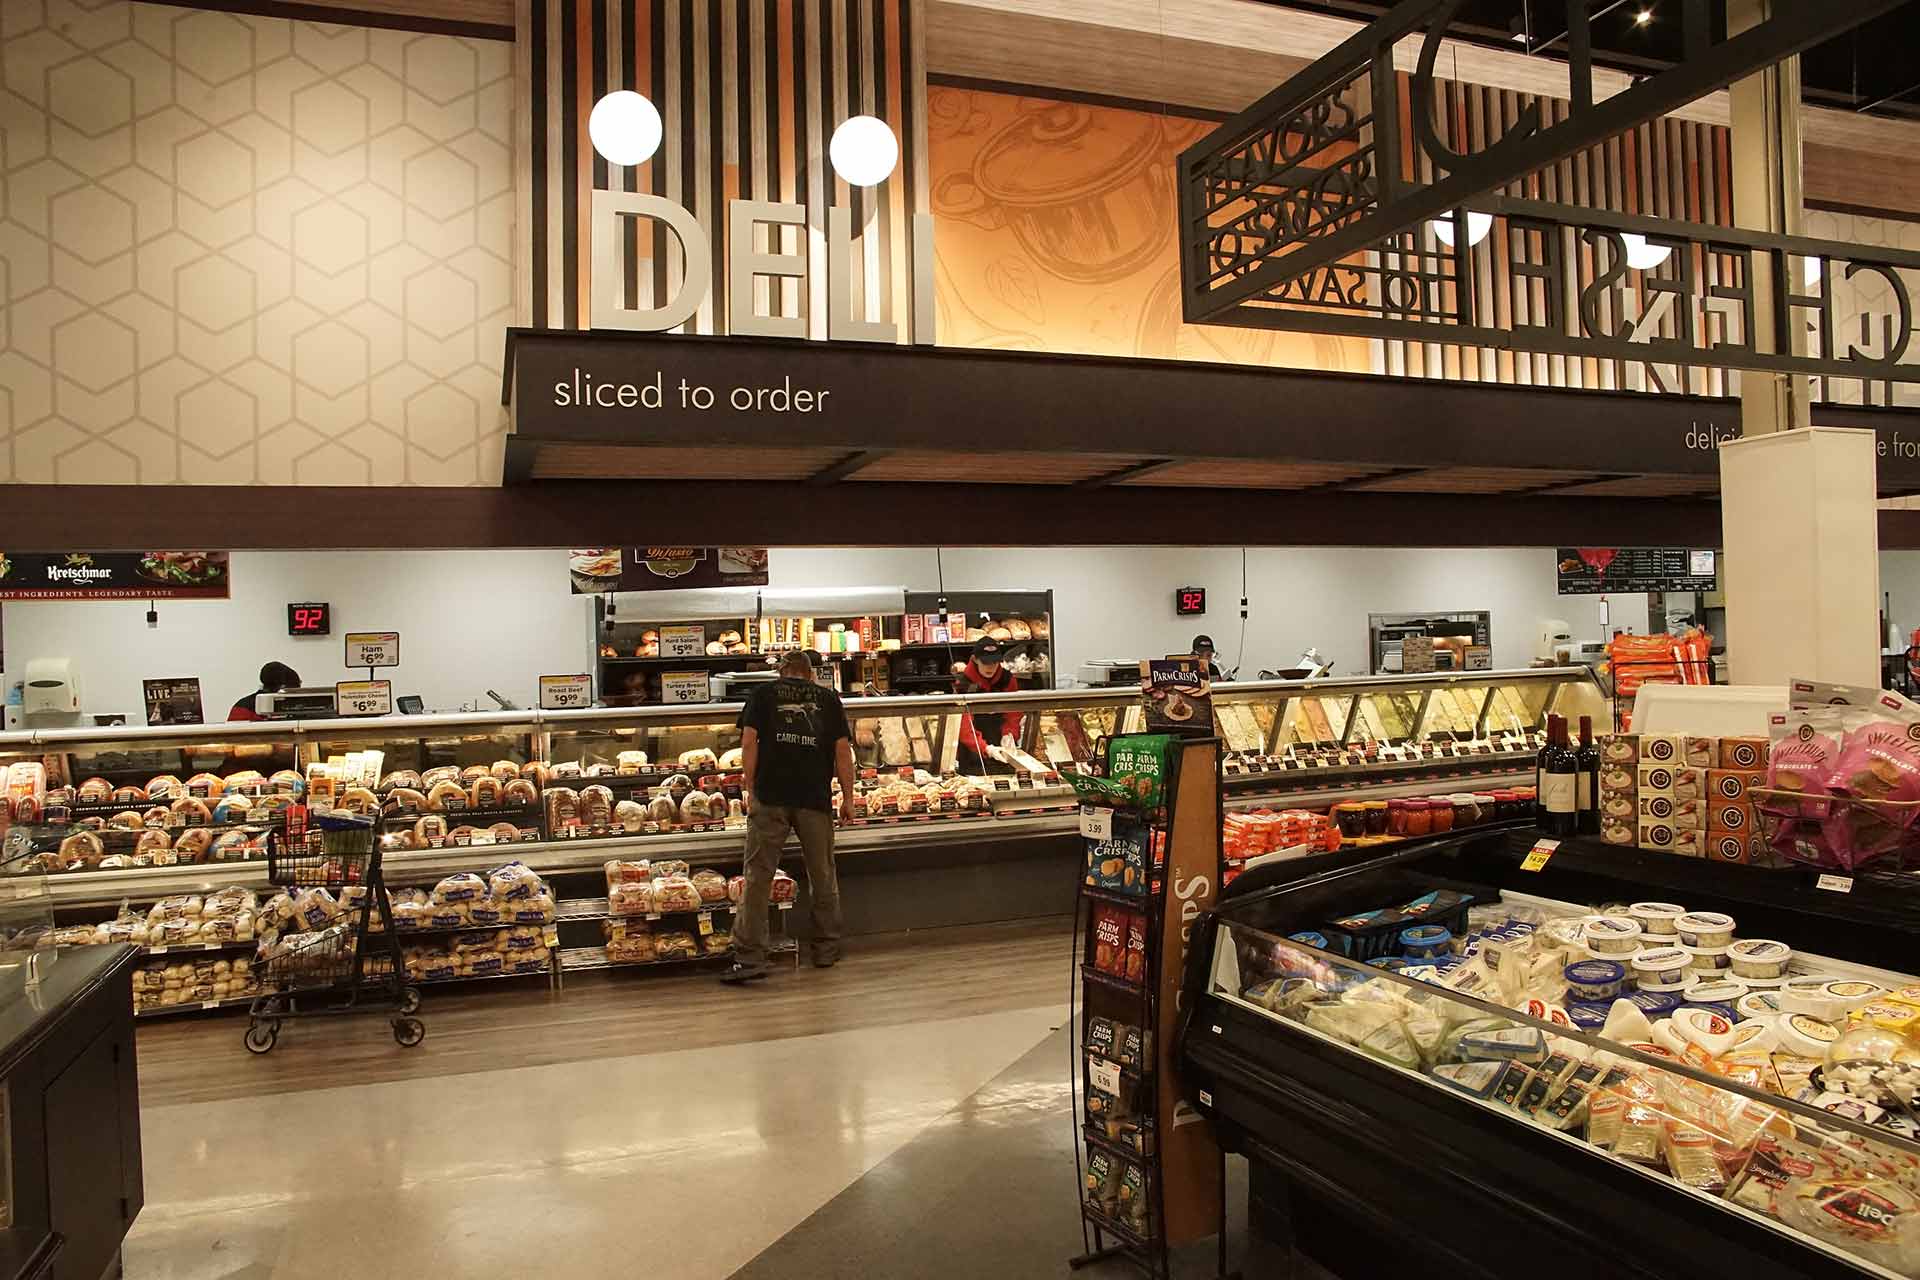 the Strack & Van Til fresh deli, an impressive medley of mouthwatering sliced meats and cheeses, and a wide selection of tempting salad options; hot/cold entrees and sides, ready to heat meals & more